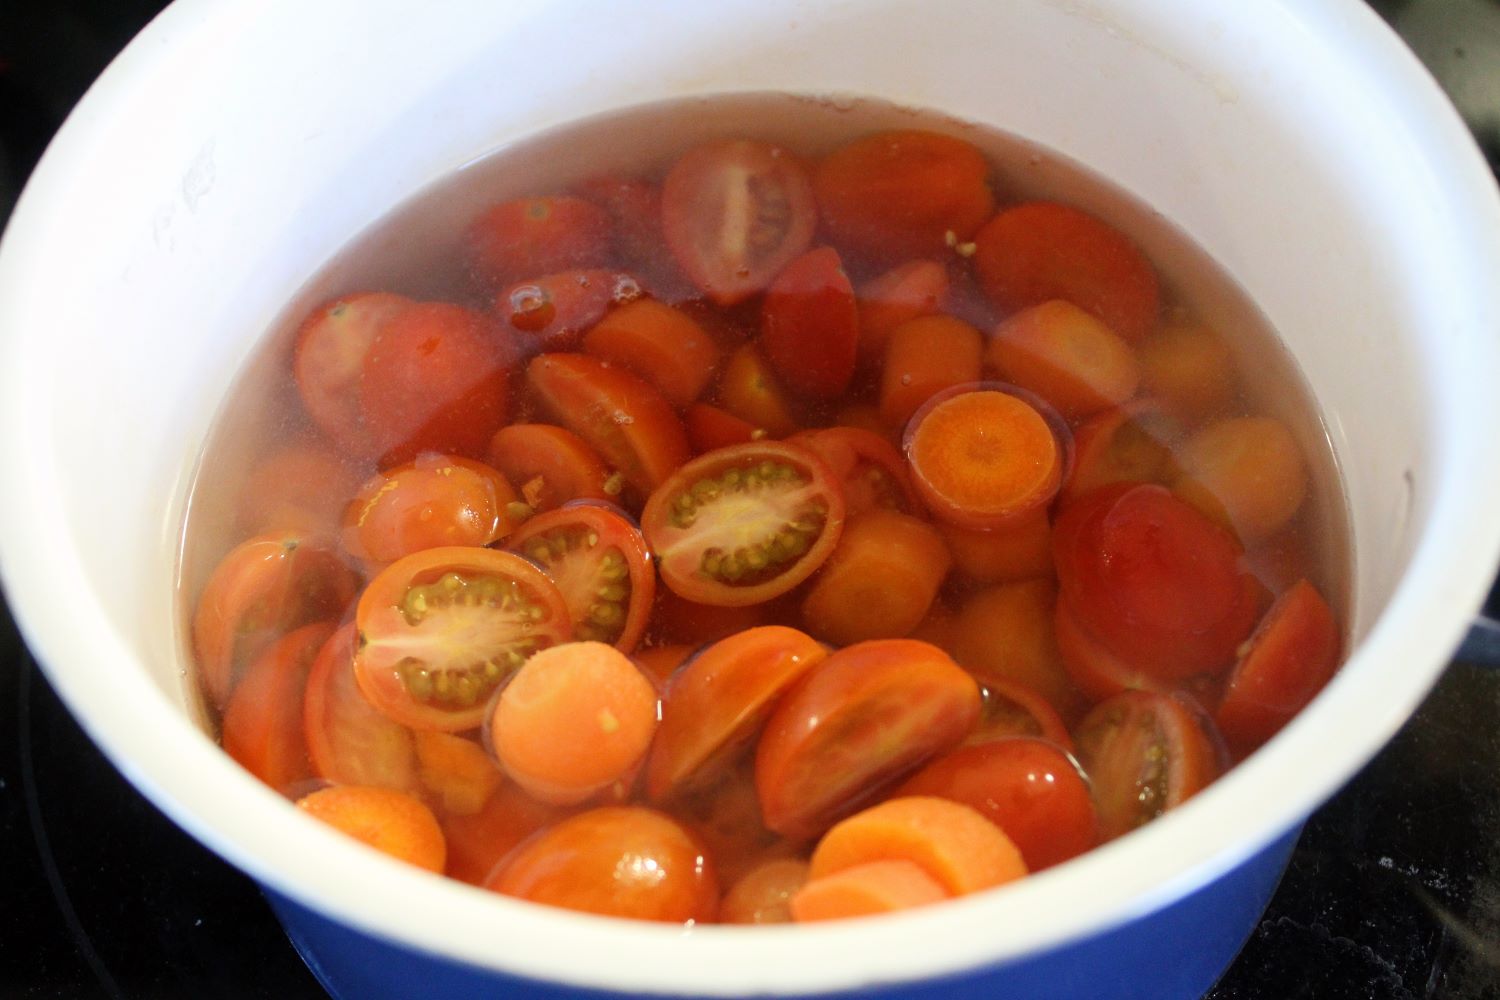 boil tomatoes and carrots for salad 1